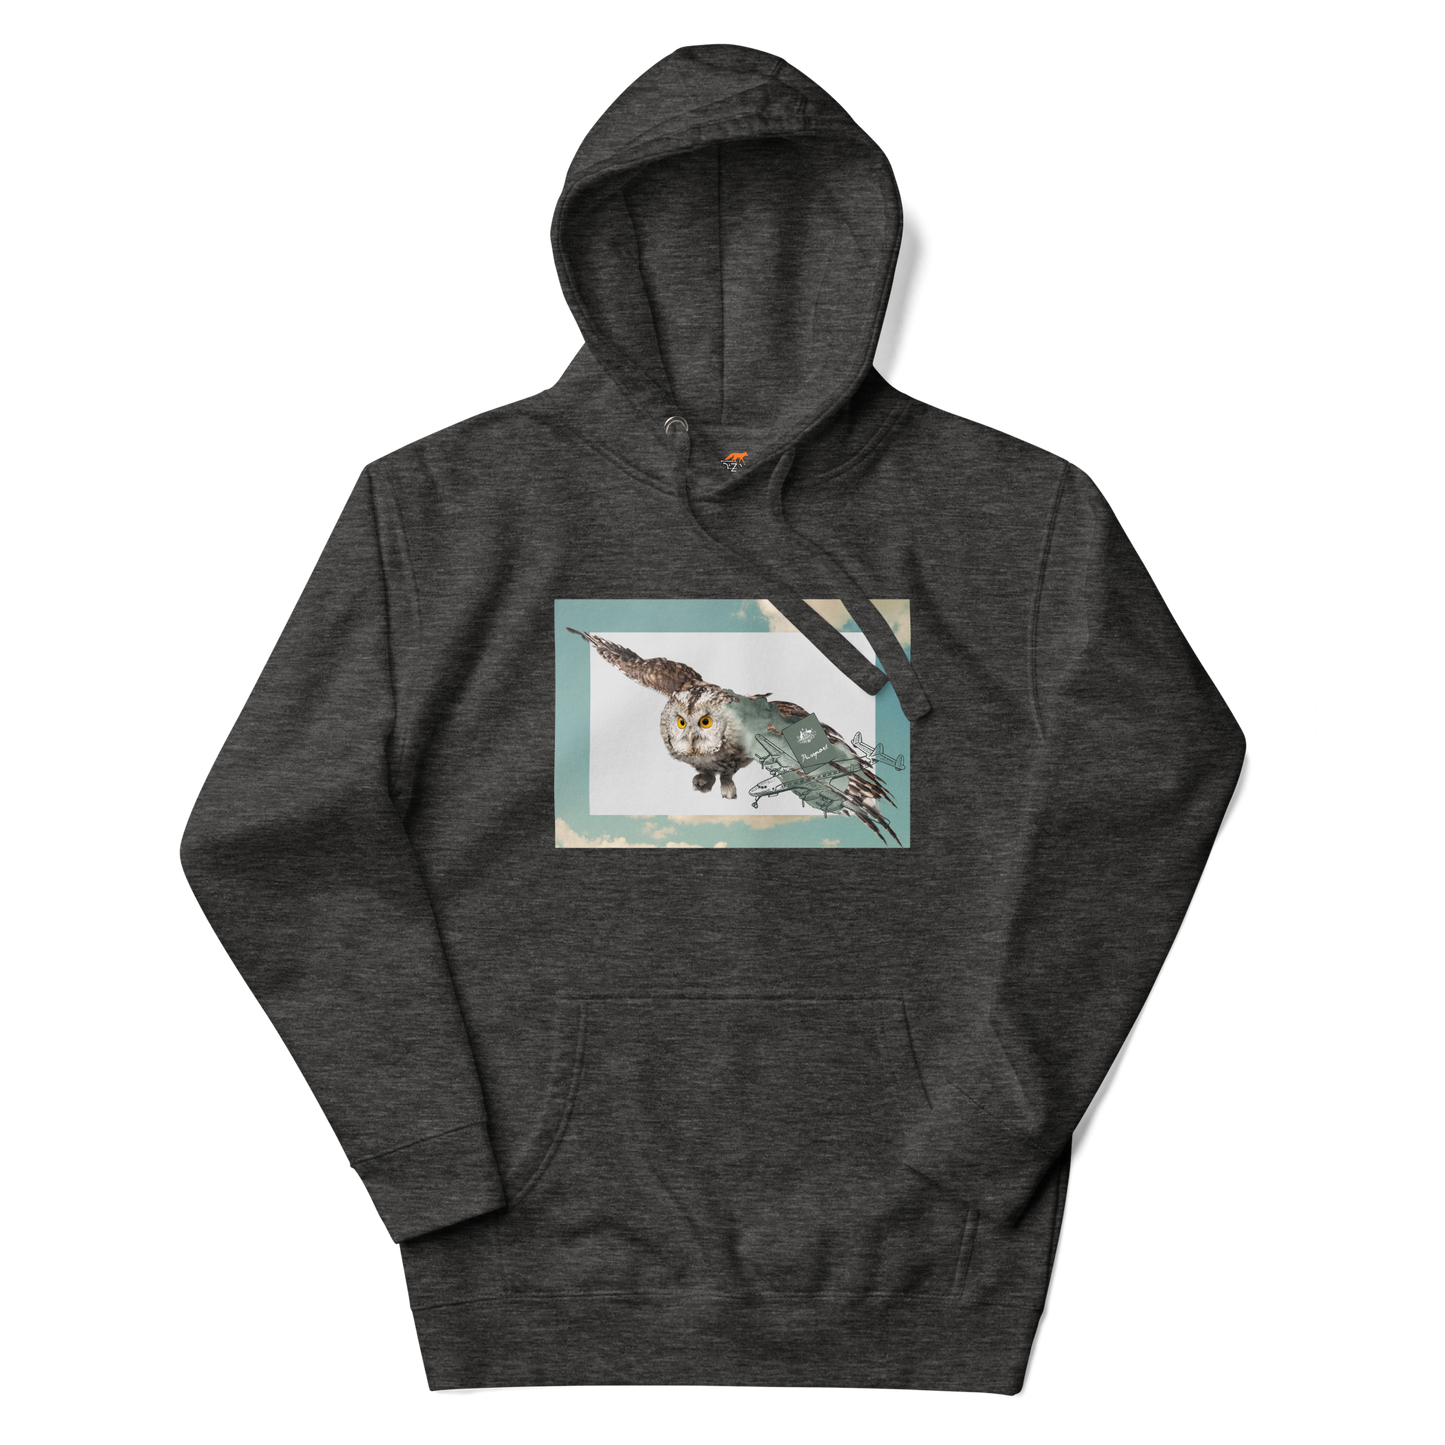 Charcoal Heather Premium Owl Hoodie featuring a cool Flying Owl graphic on the chest - Cool Graphic Owl Hoodies - Boozy Fox